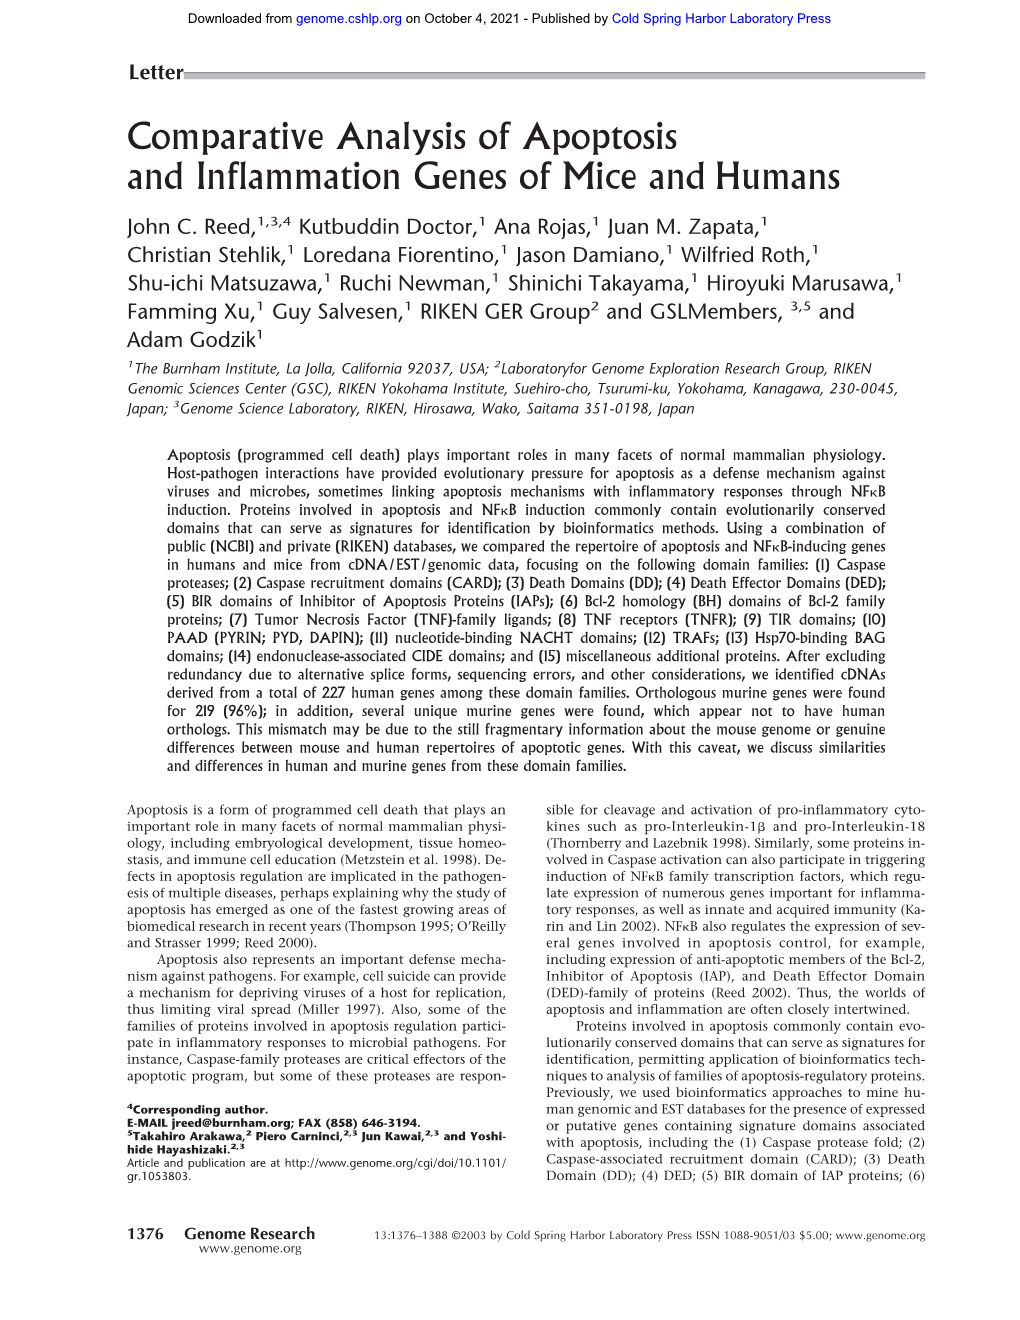 Comparative Analysis of Apoptosis and Inflammation Genes of Mice and Humans John C